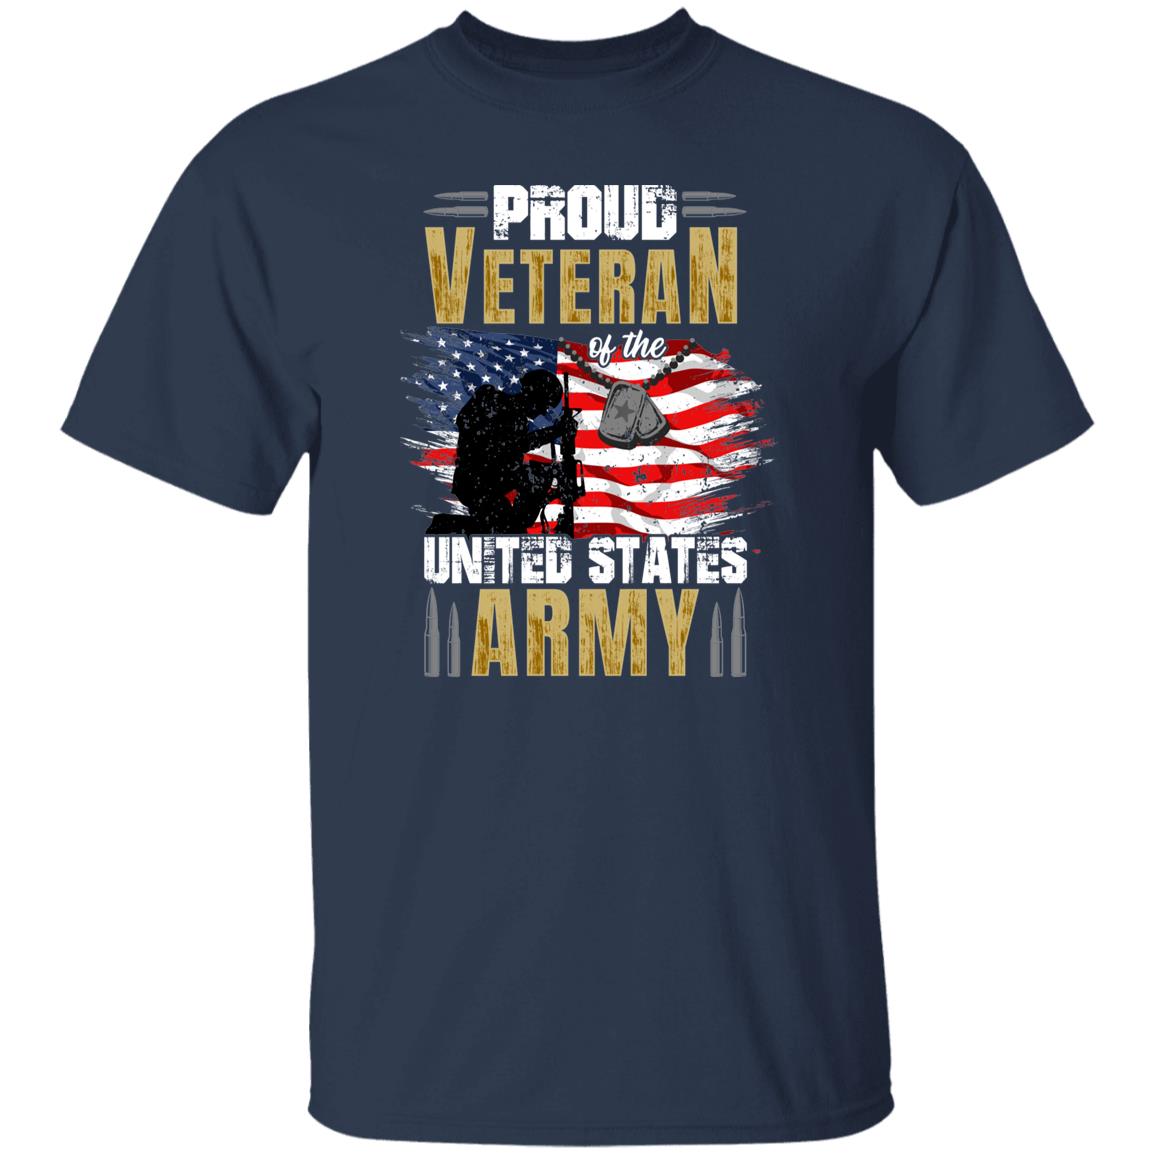 Proud Veteran of The United States Army Tee US Flag Shirt